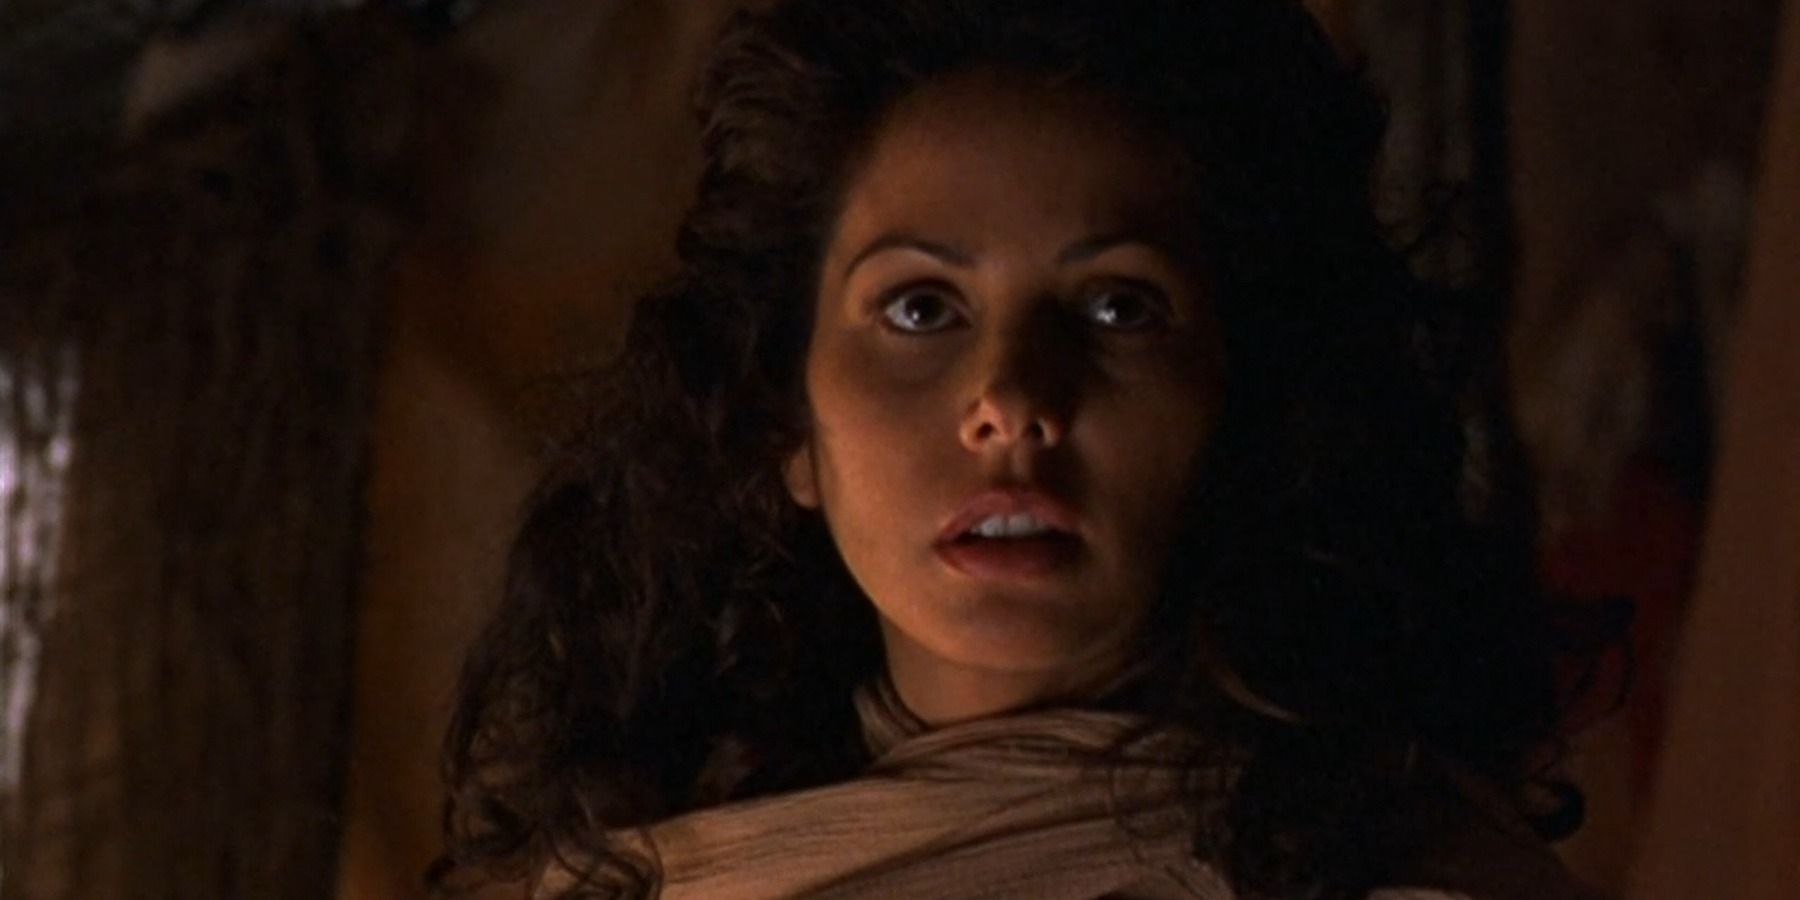 stargate sg-1: exploring the wasted potential of sha're1